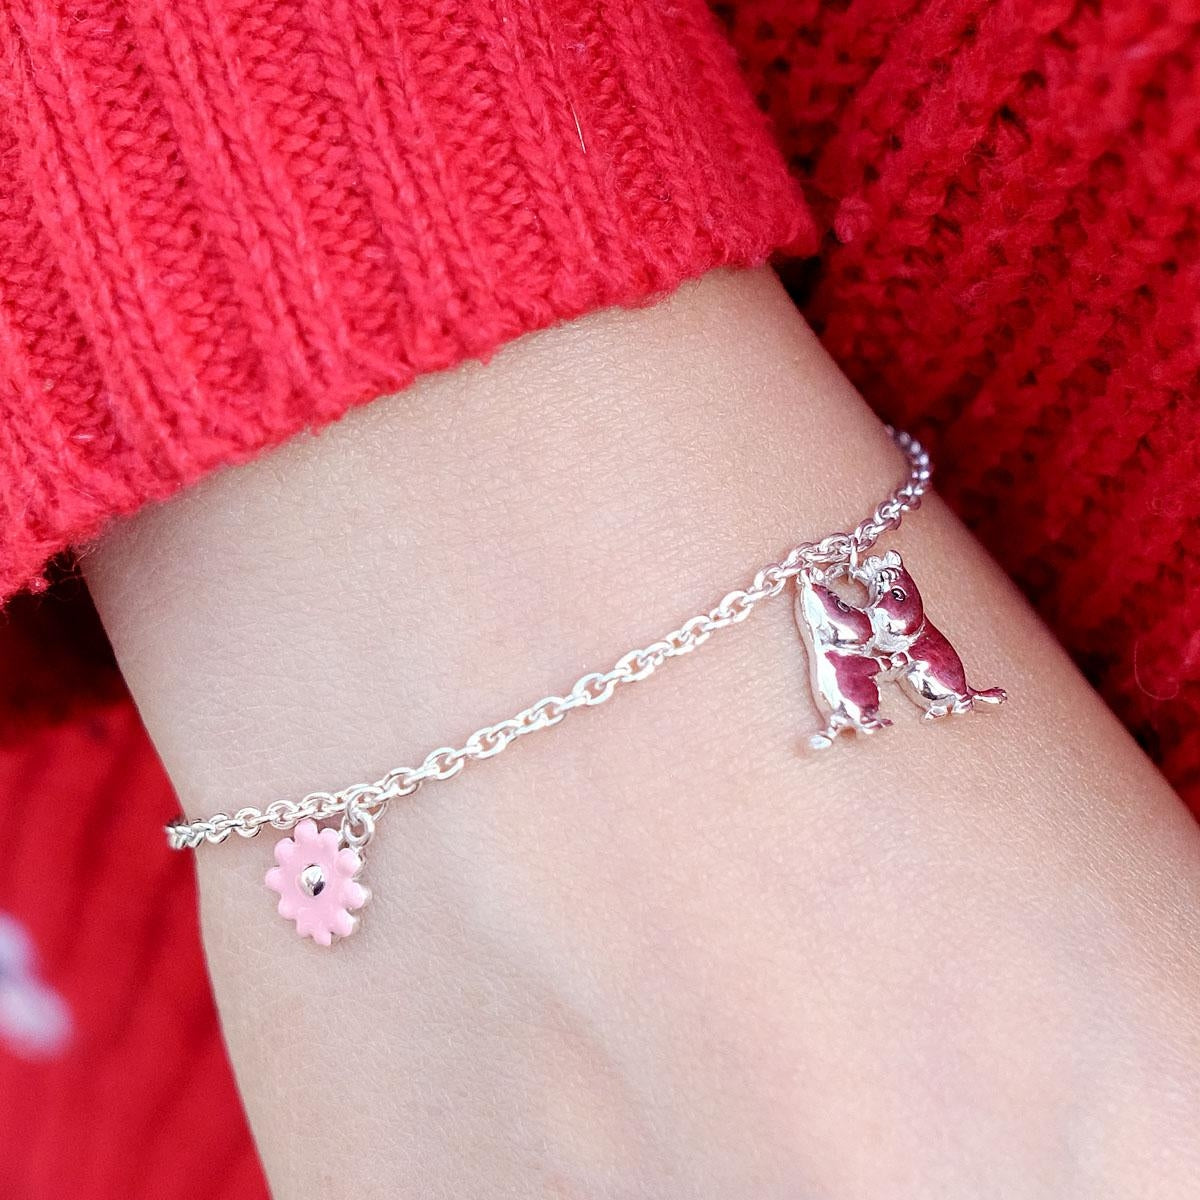 Moomin and Snorkmaiden Silver Bracelet